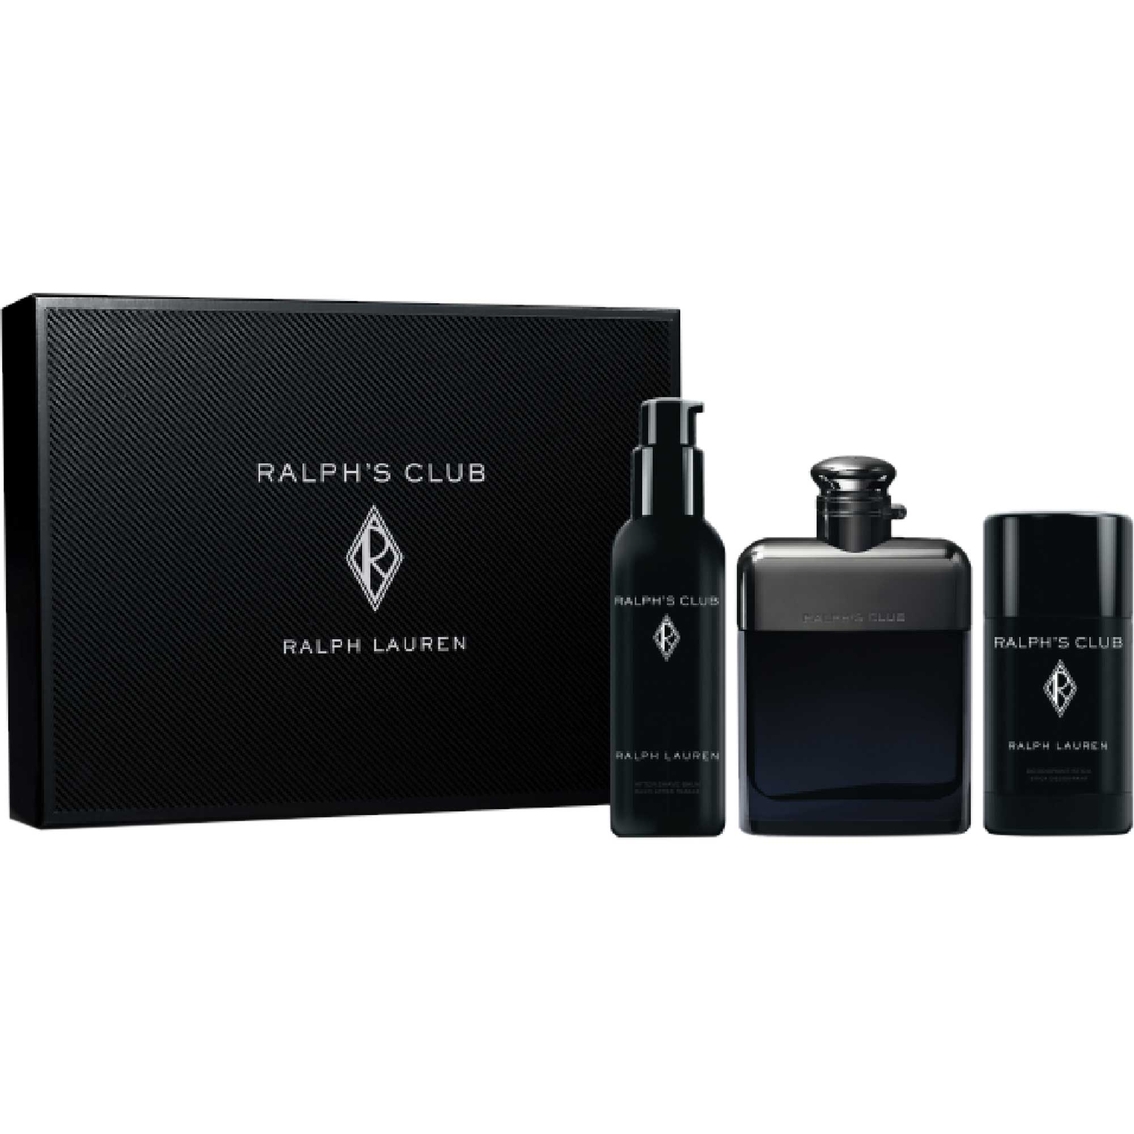 Ralph Lauren Ralph's Club Fragrance 3 Pc. Set | Gifts Sets For Him ...